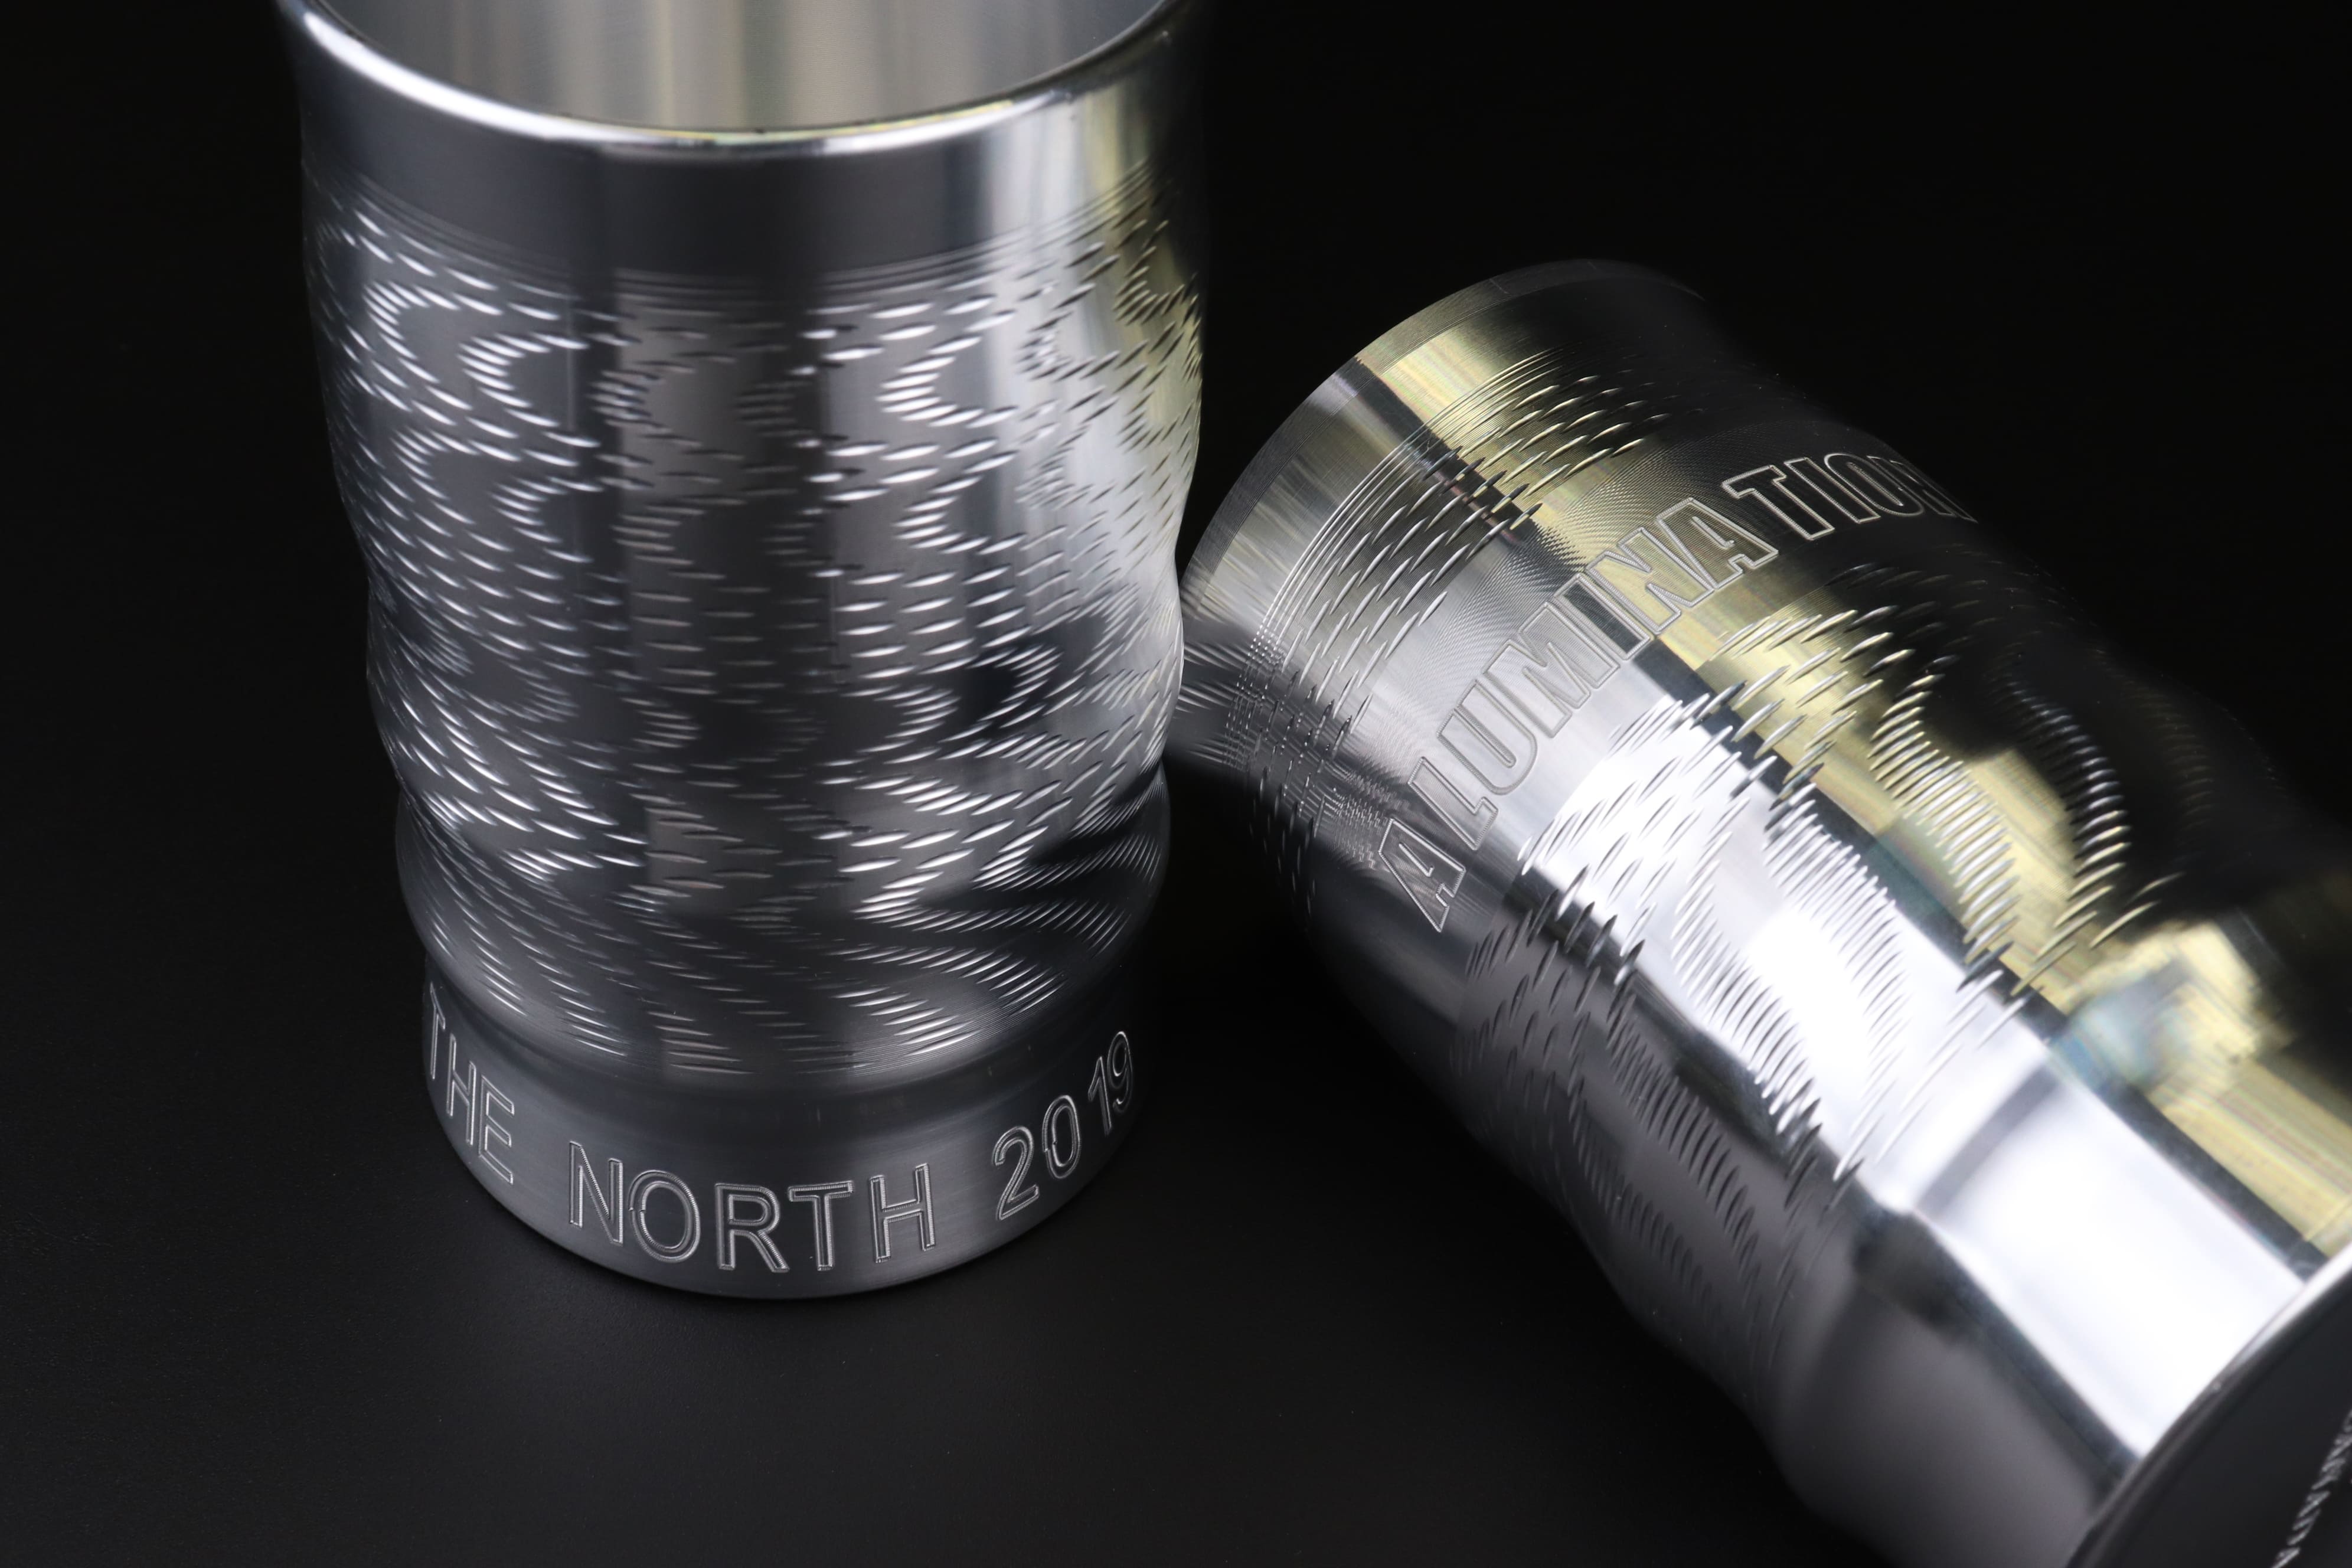 Image of two cylindrical aluminum cups engraved with text 'THE NORTH 2019' for one and 'ALUMINATION' for the other.